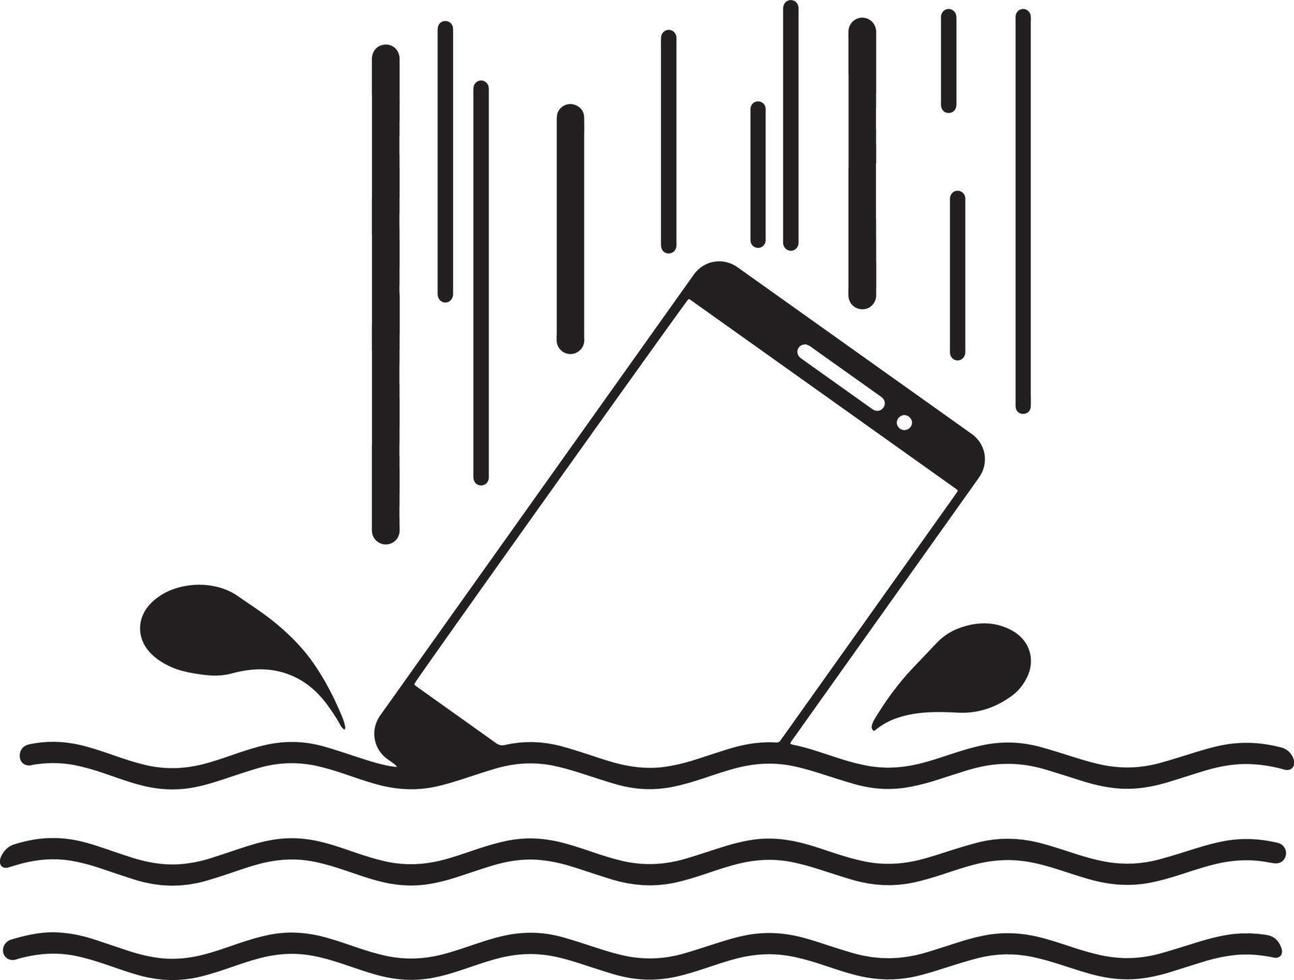 Smart phone drop into the water with splashes vector